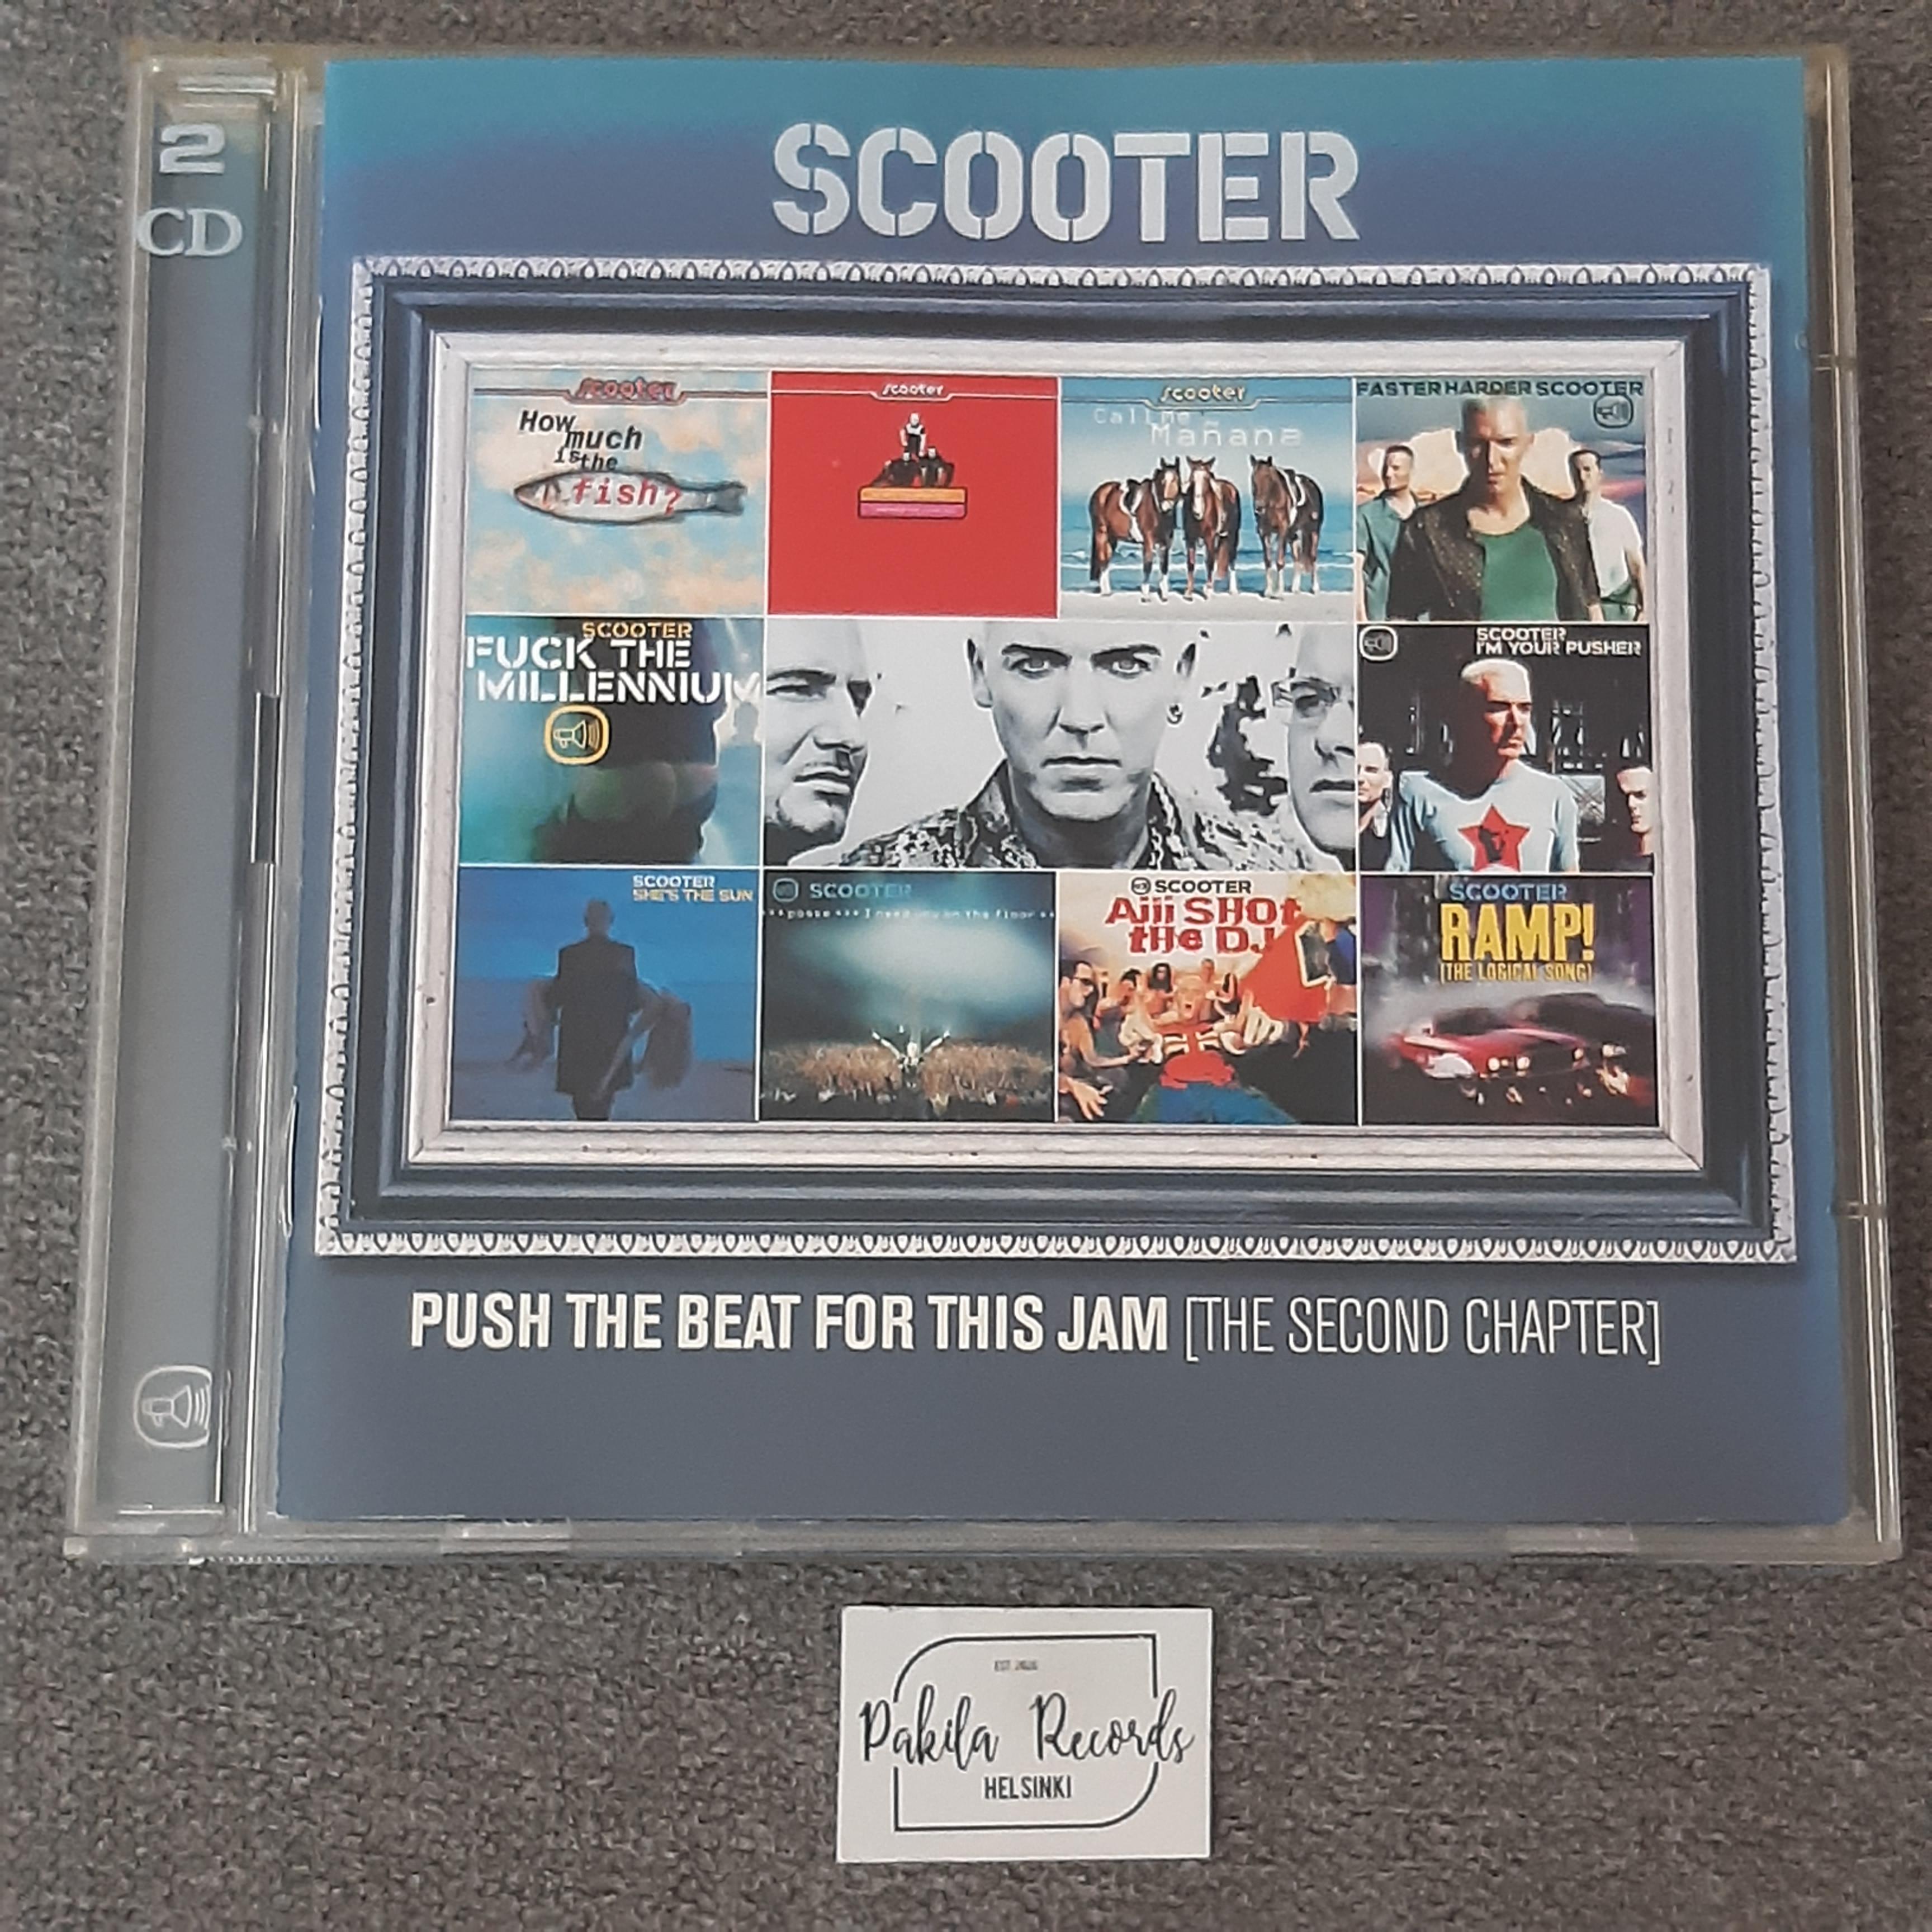 Scooter - Push The Beat For This Jam (The Second Chapter) - 2 CD (käytetty)